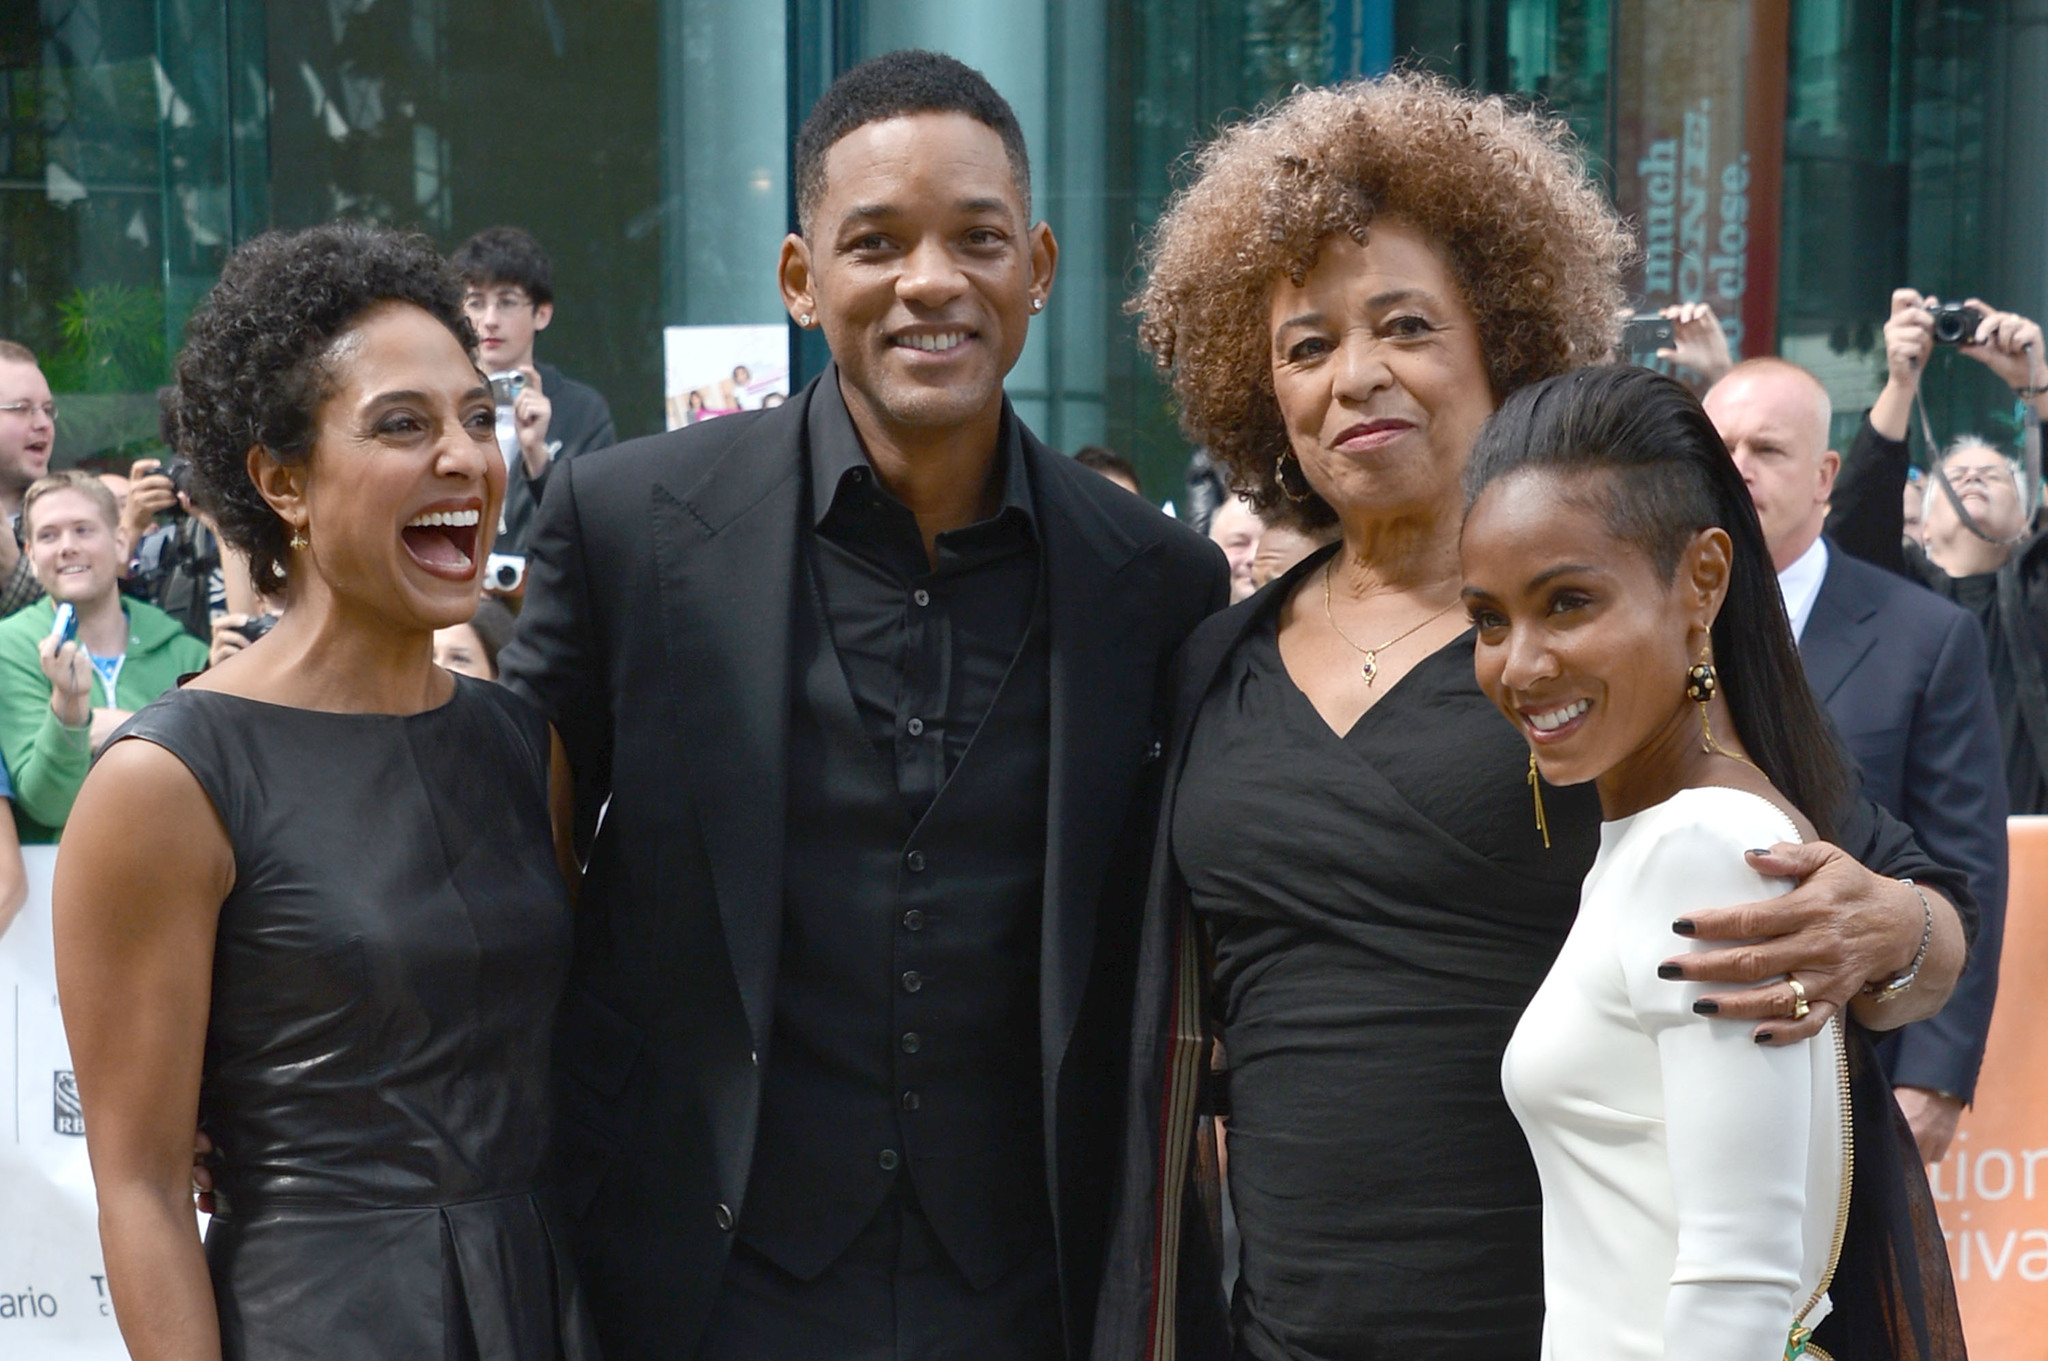 Will Smith, Jada Pinkett Smith, Angela Davis and Shola Lynch at event of Free Angela and All Political Prisoners (2012)